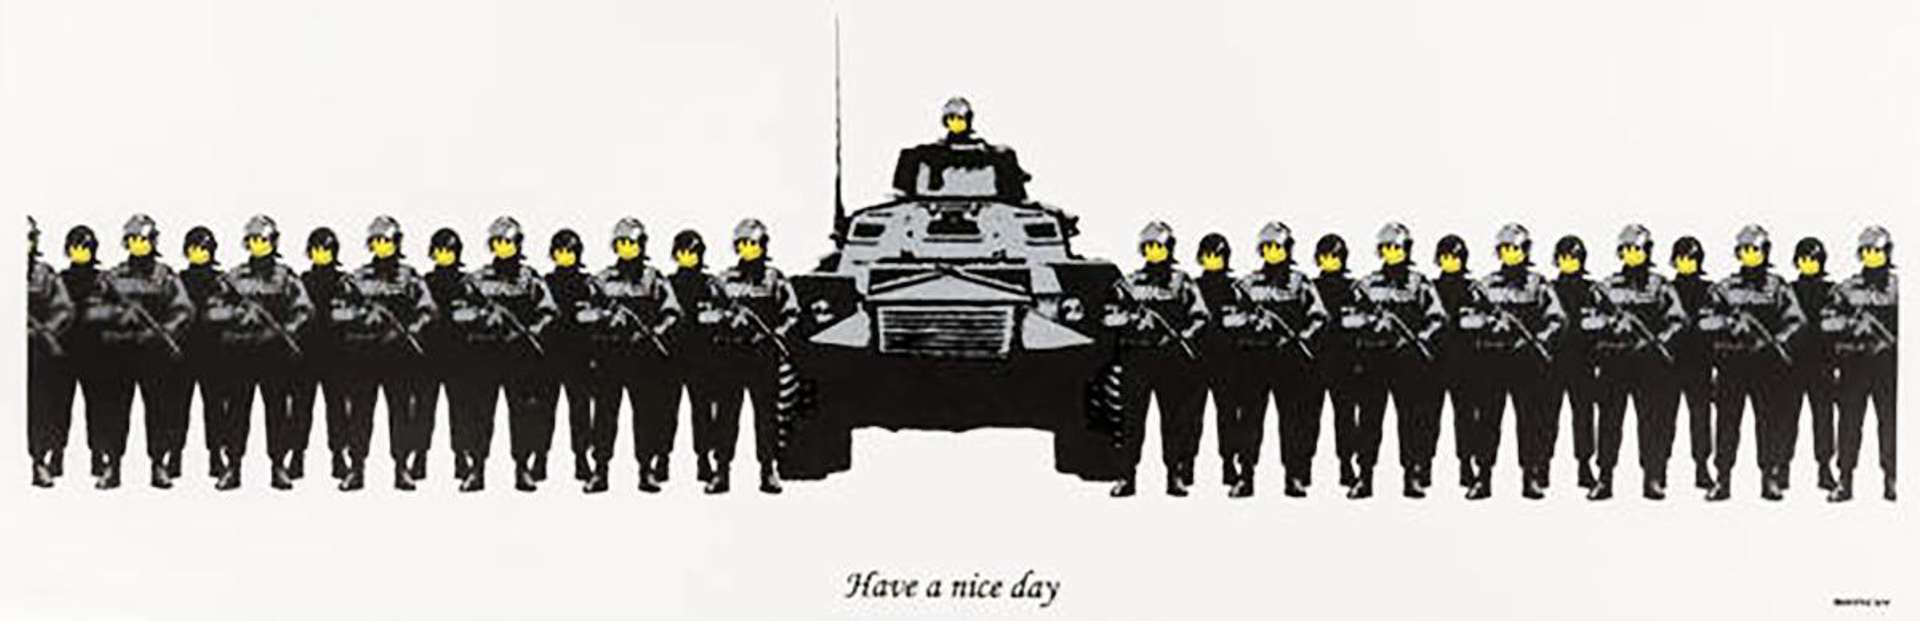 Banksy: Have A Nice Day (Anarchist Book Fair) - Signed Print